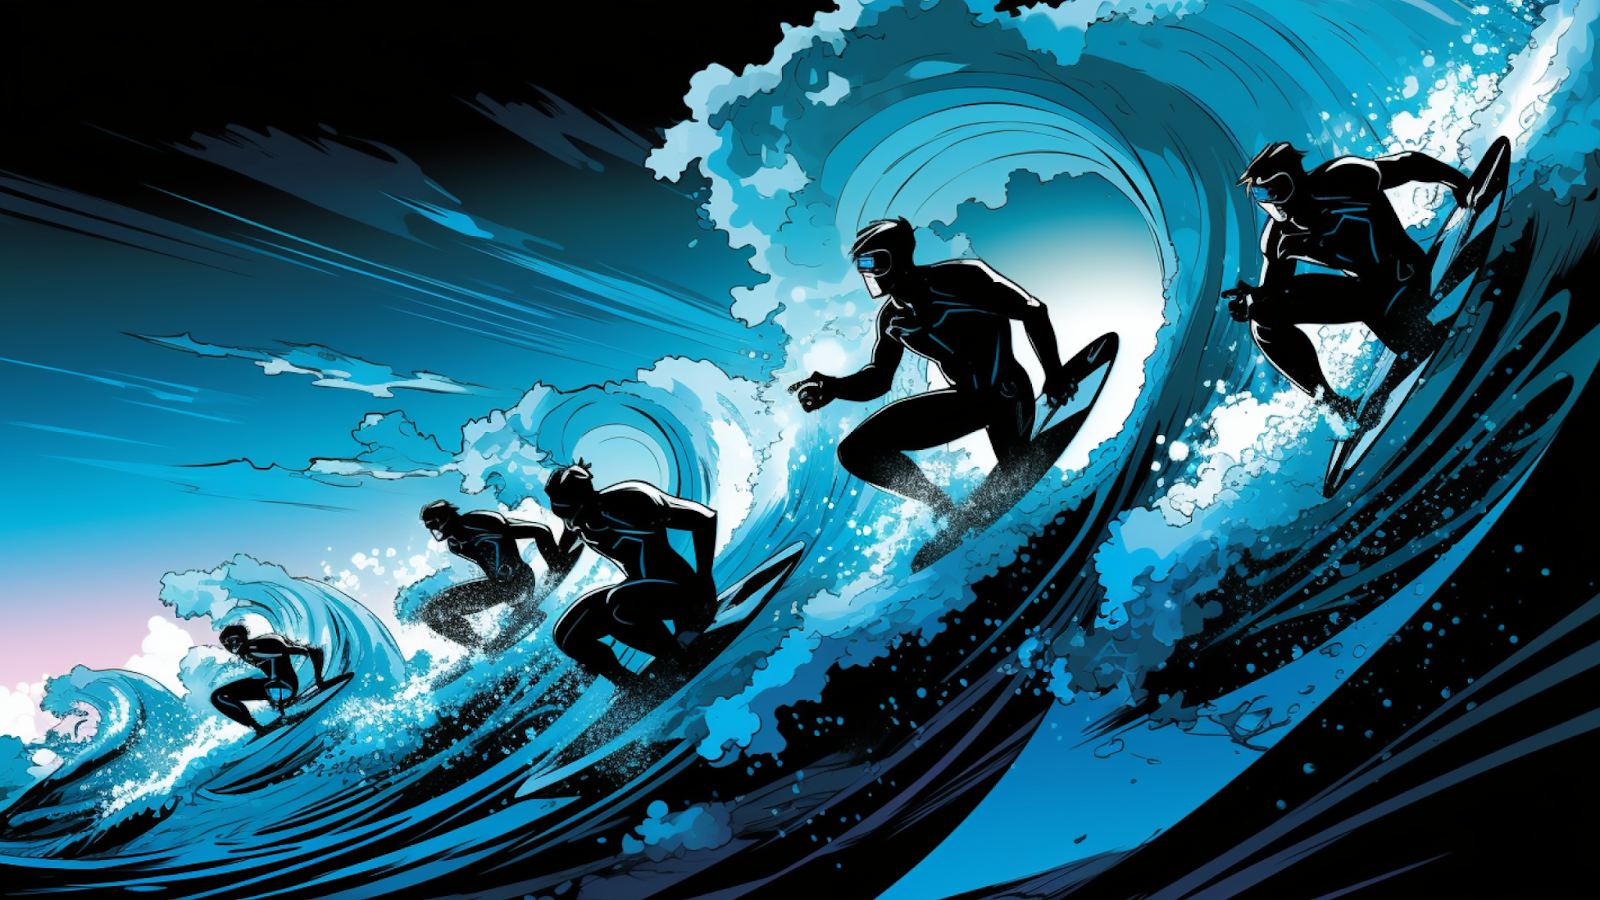 game image showing five figures surfing